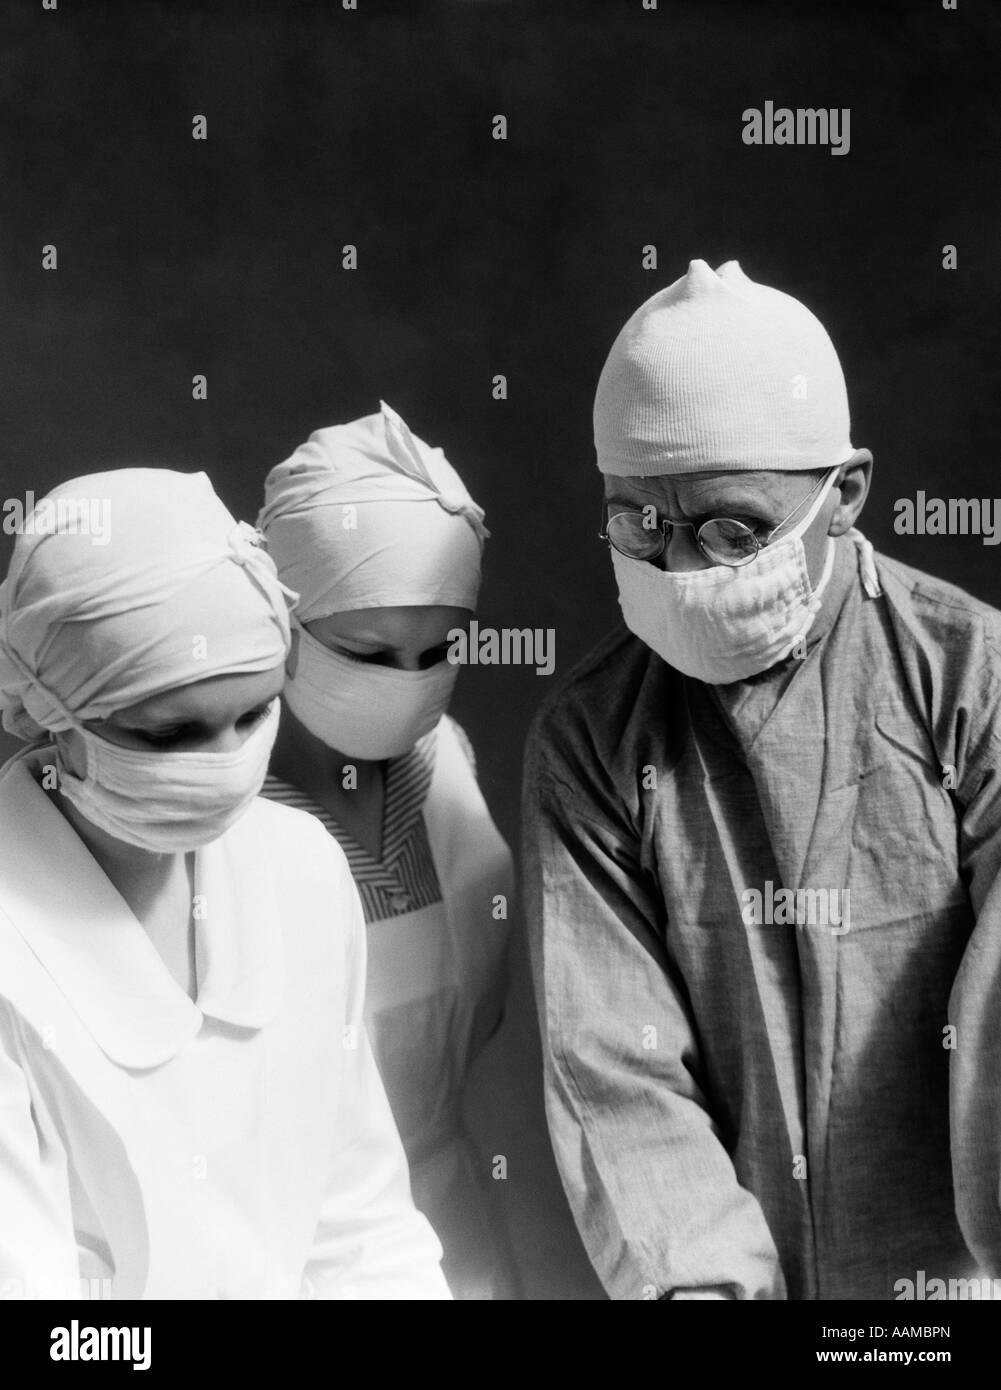 1920s 1930s DOCTOR TWO NURSES WEARING SURGICAL MASKS CAPS LOOKING DOWN Stock Photo